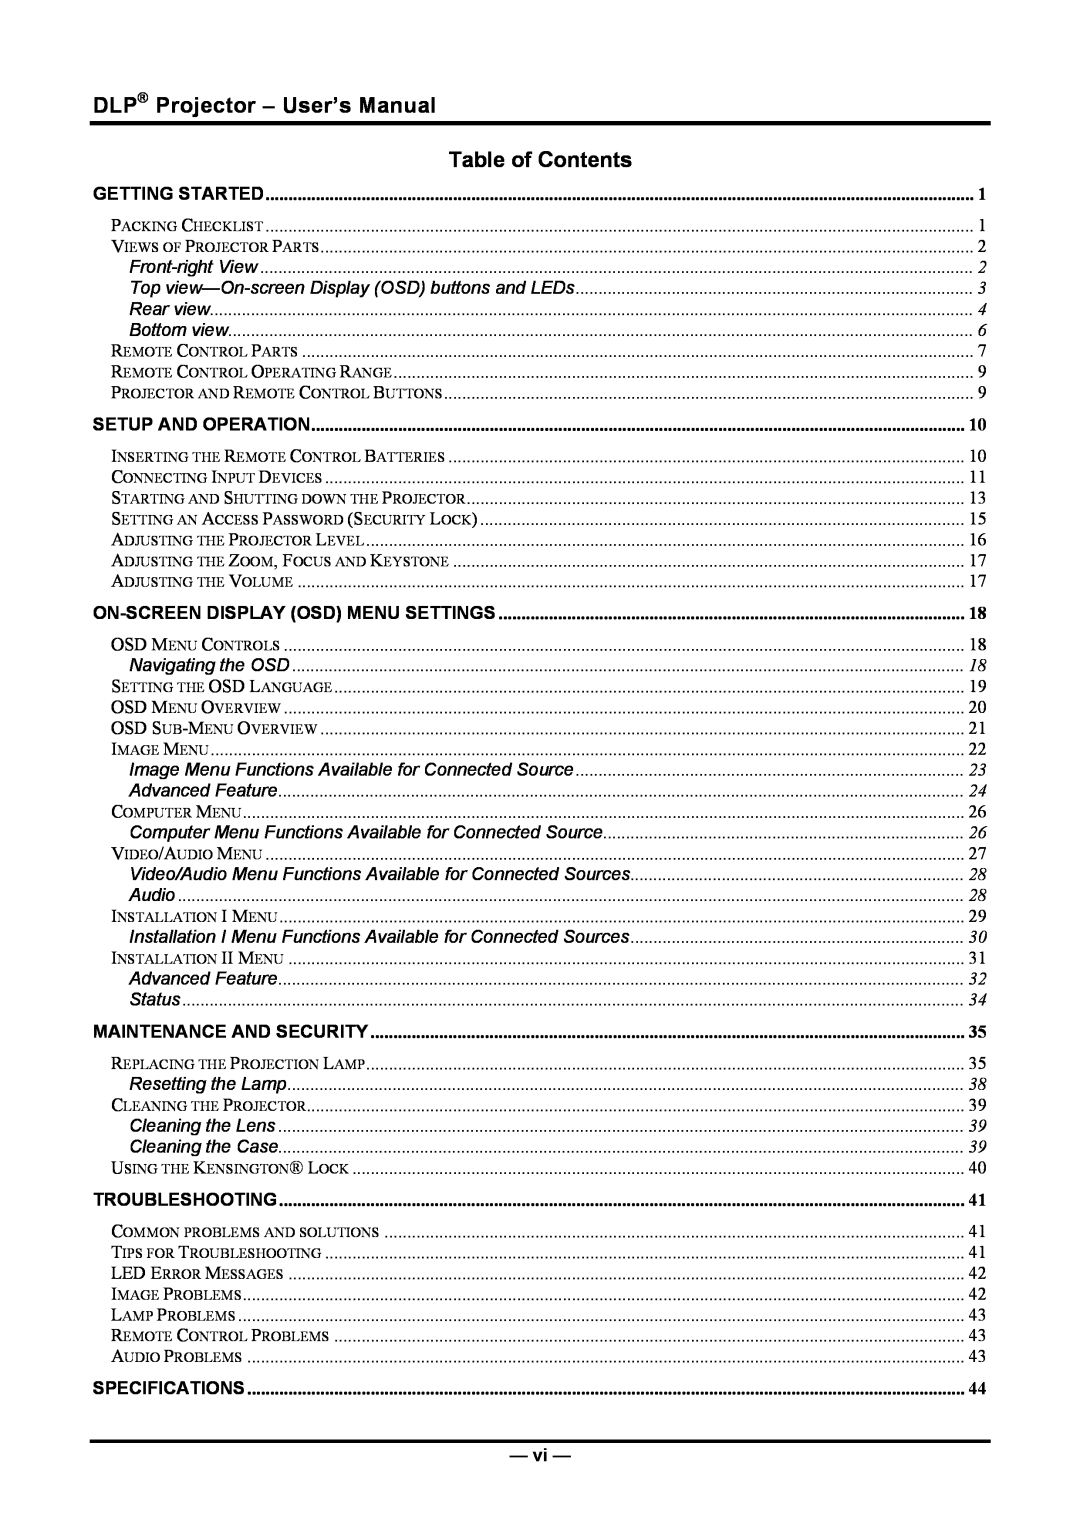 Planar PR5030 Table of Contents, DLP Projector - User’s Manual, Getting Started, Setup And Operation, Troubleshooting 